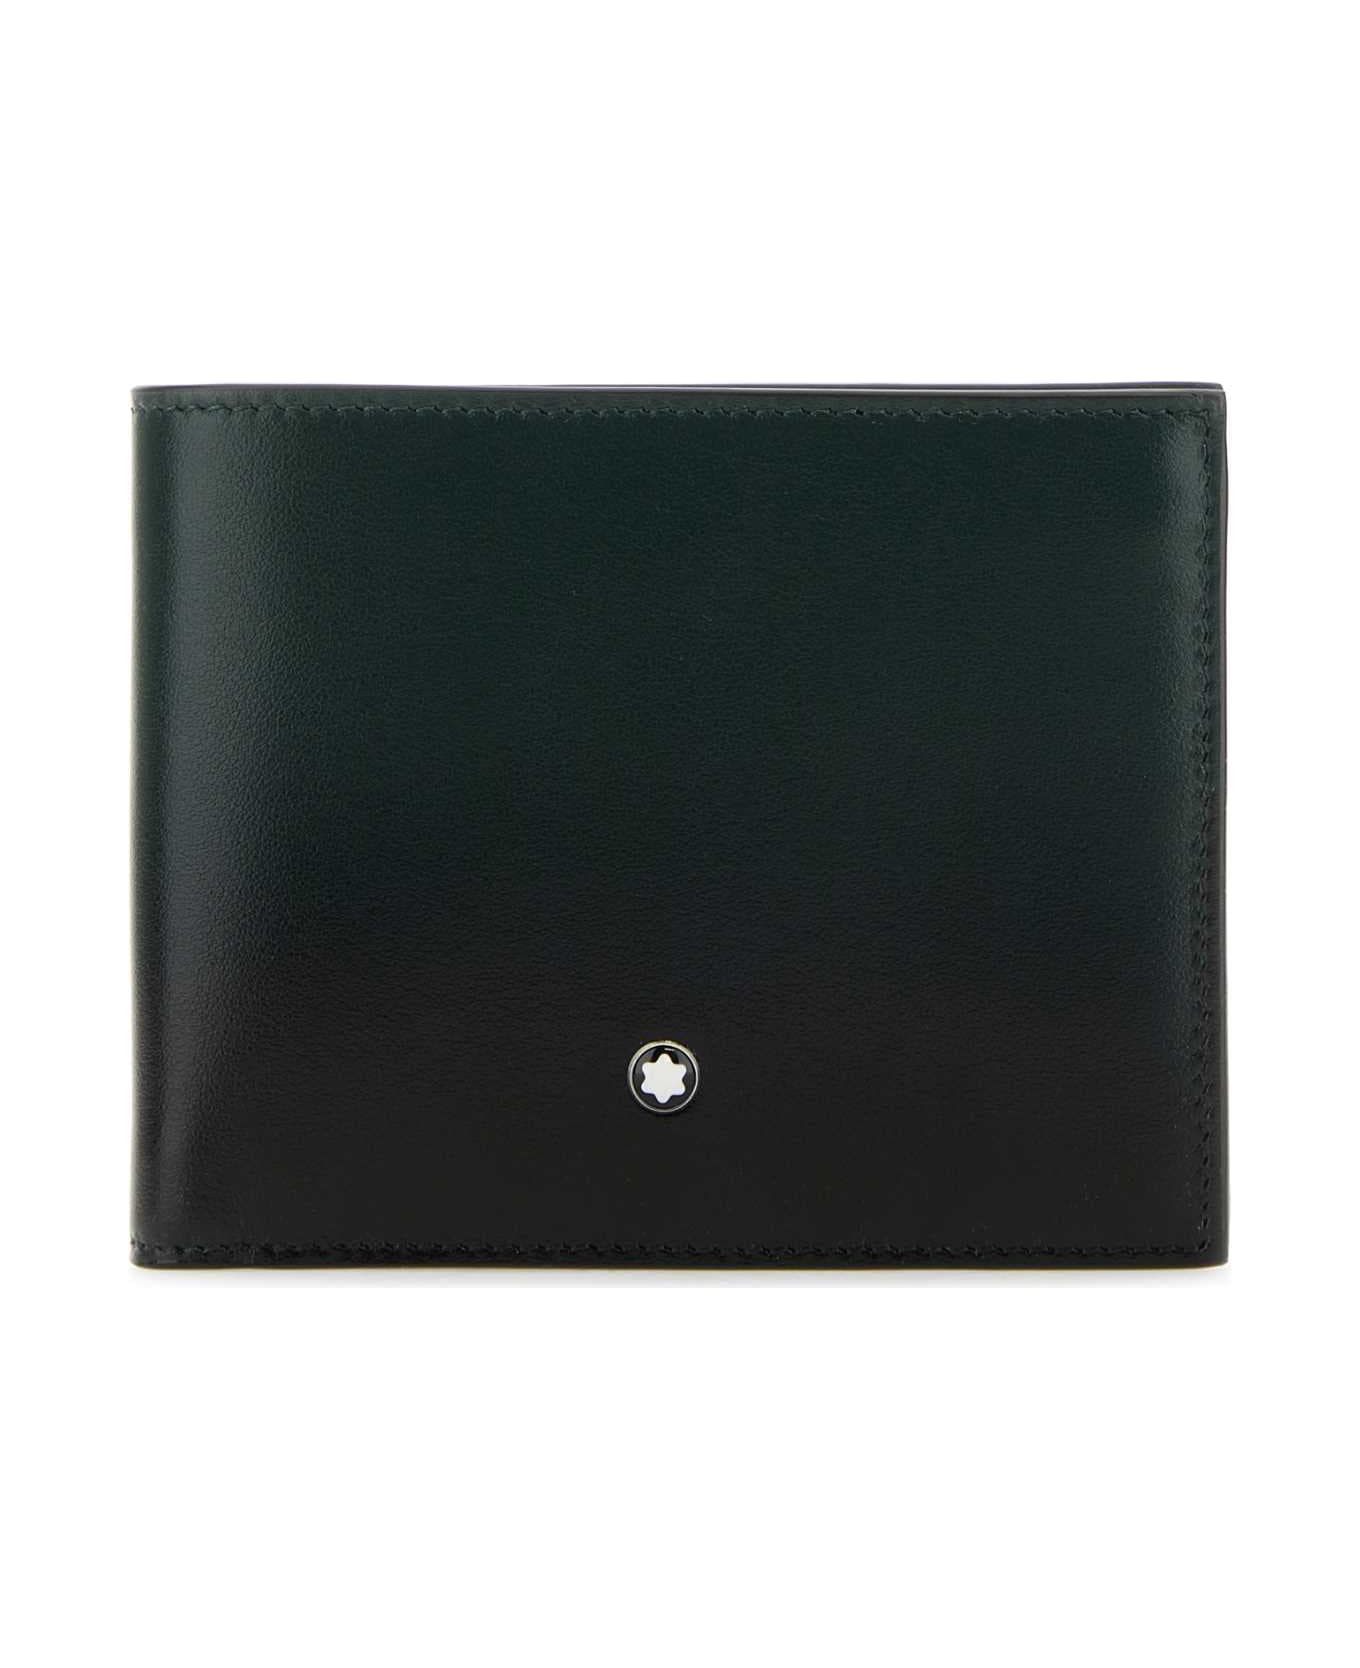 Montblanc Two-tone Leather Wallet - BRITISHGREEN